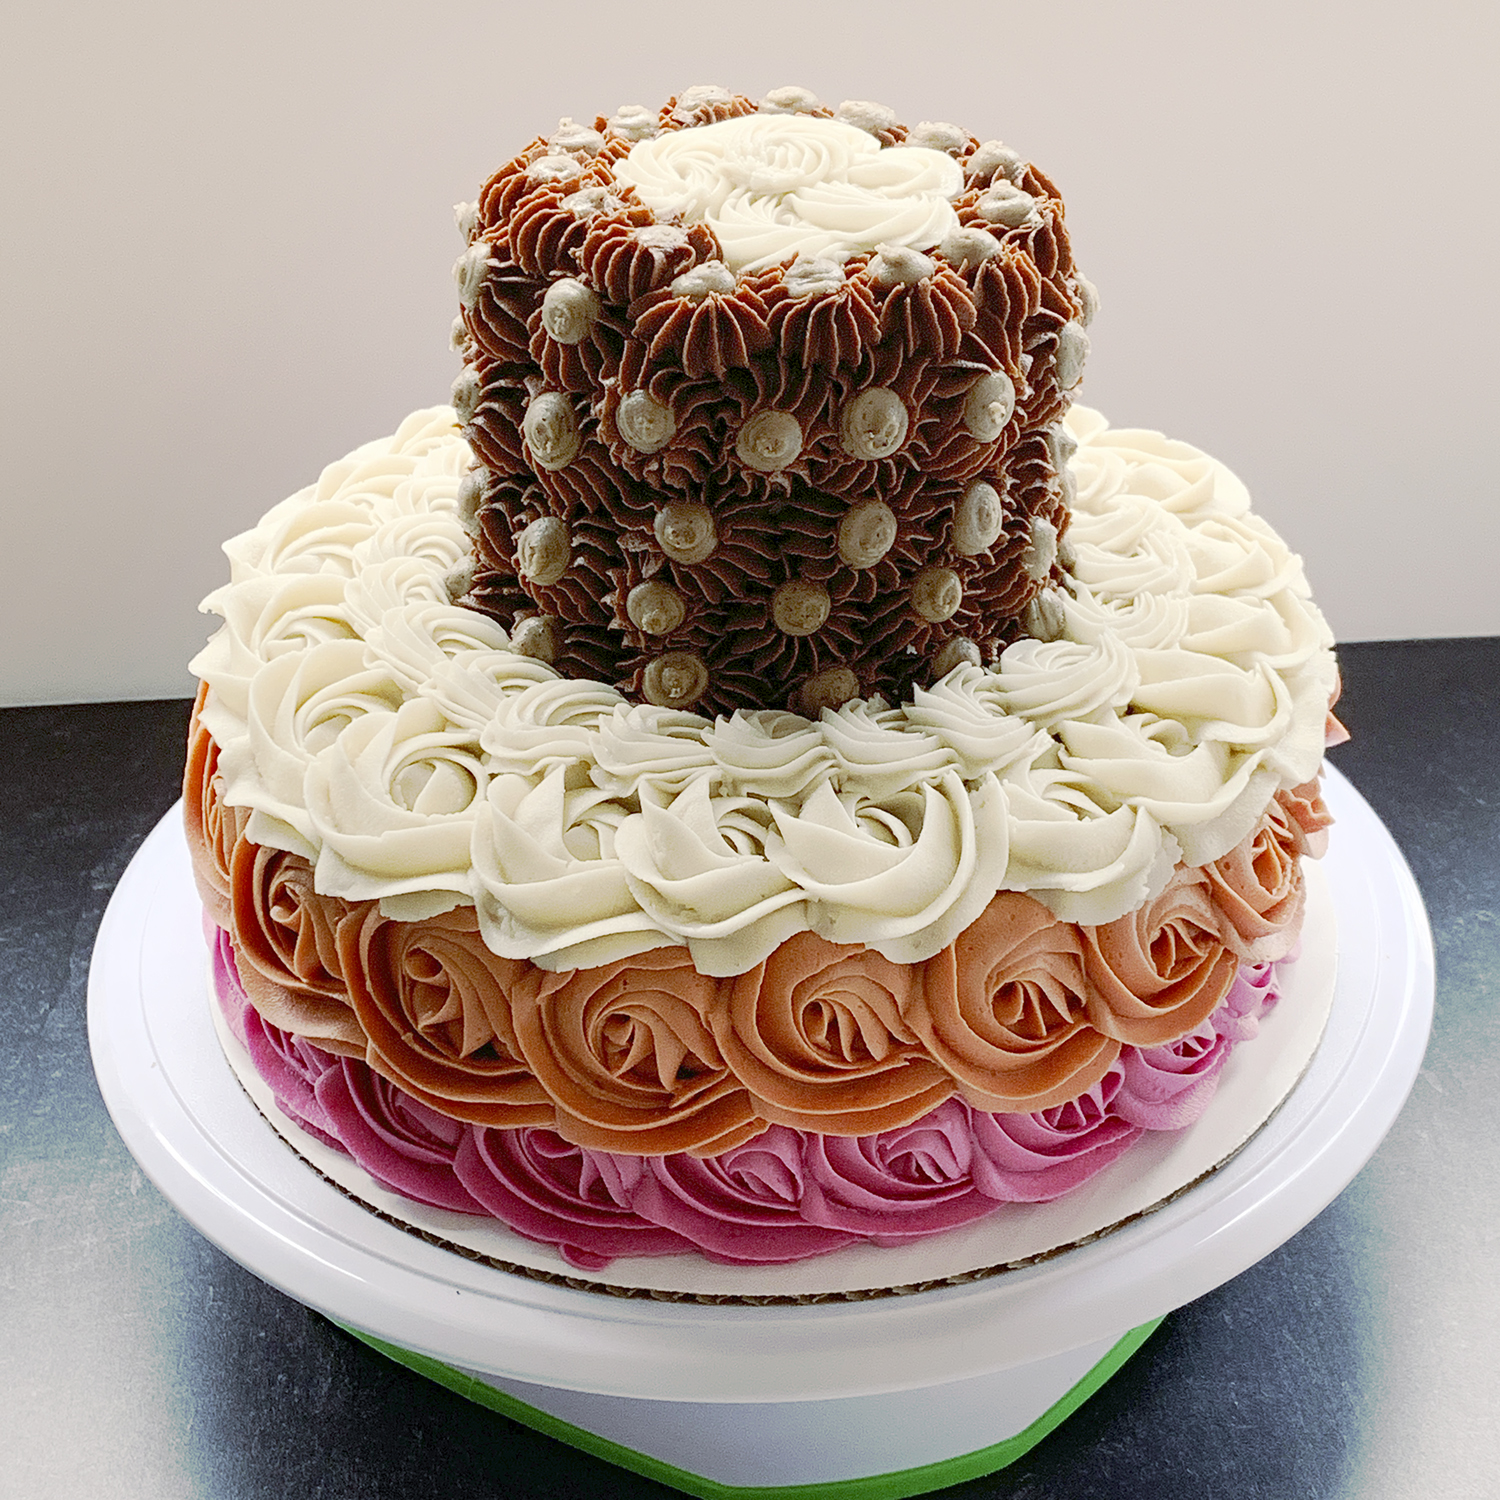 Tiered Cake by The Allergy Chef